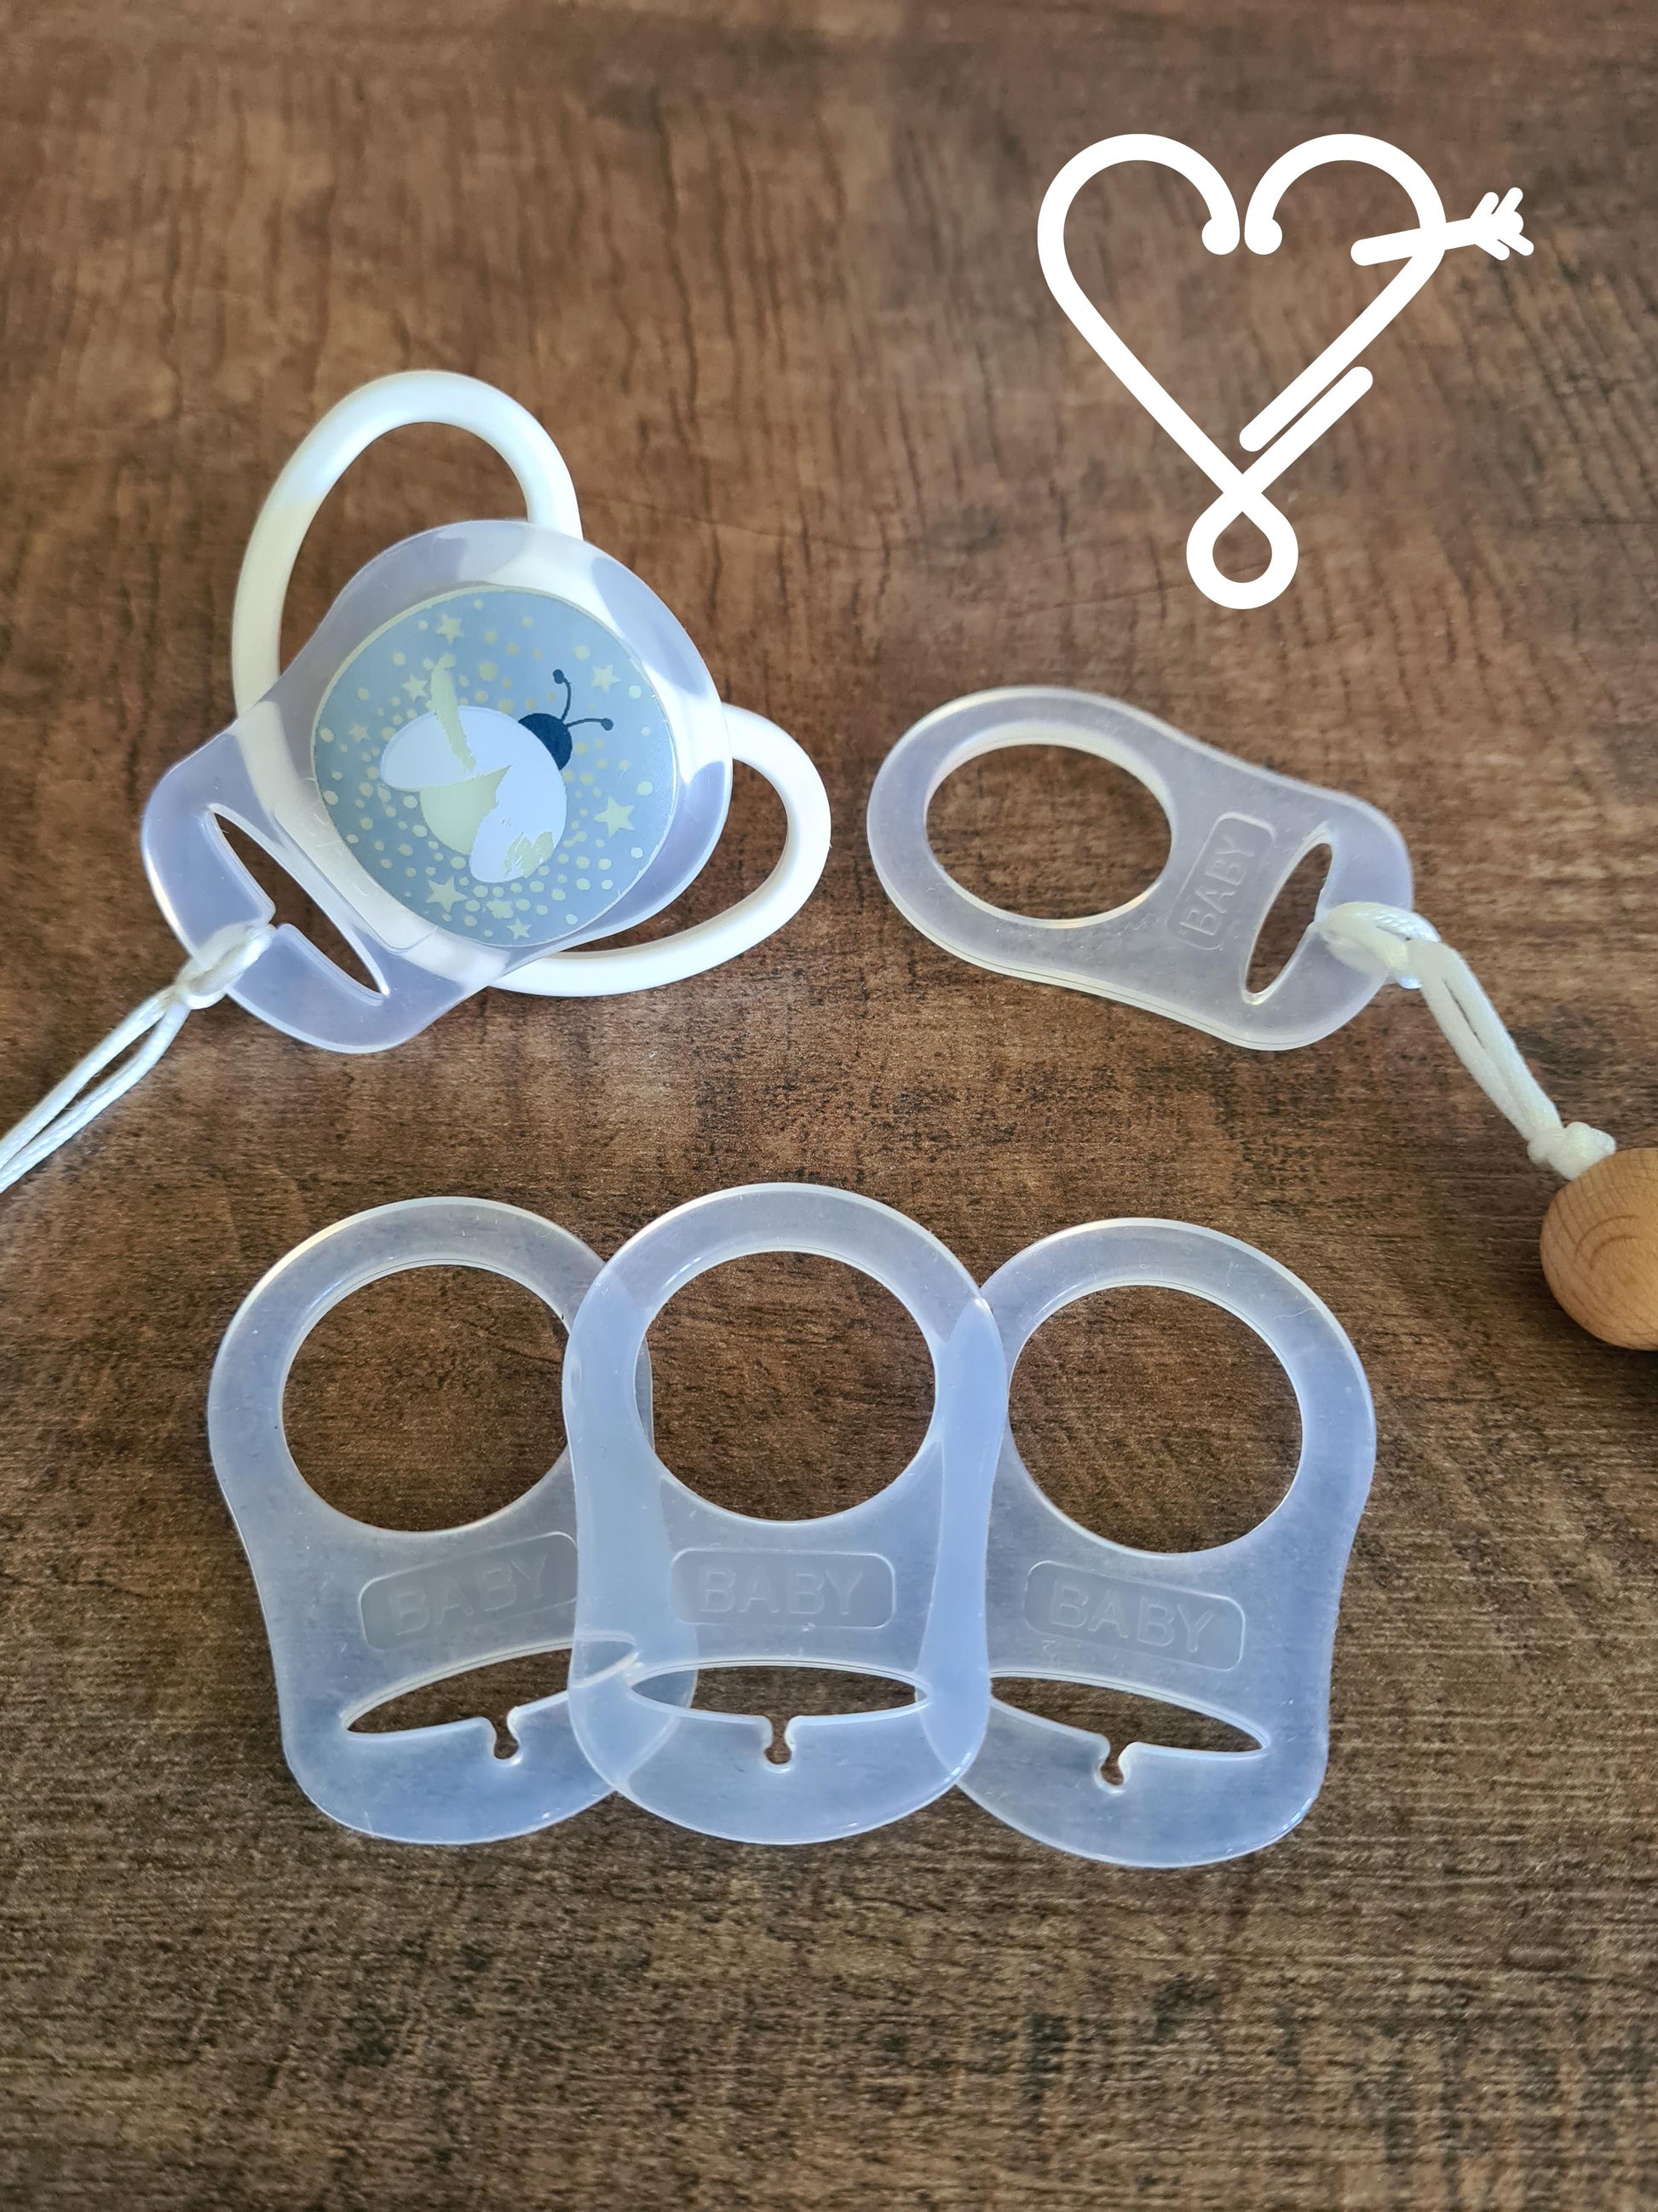 Cute handmade soother clip. Unique gift ideas for newborns and toddlers. Handcrafted Irish made. Soother adapter.